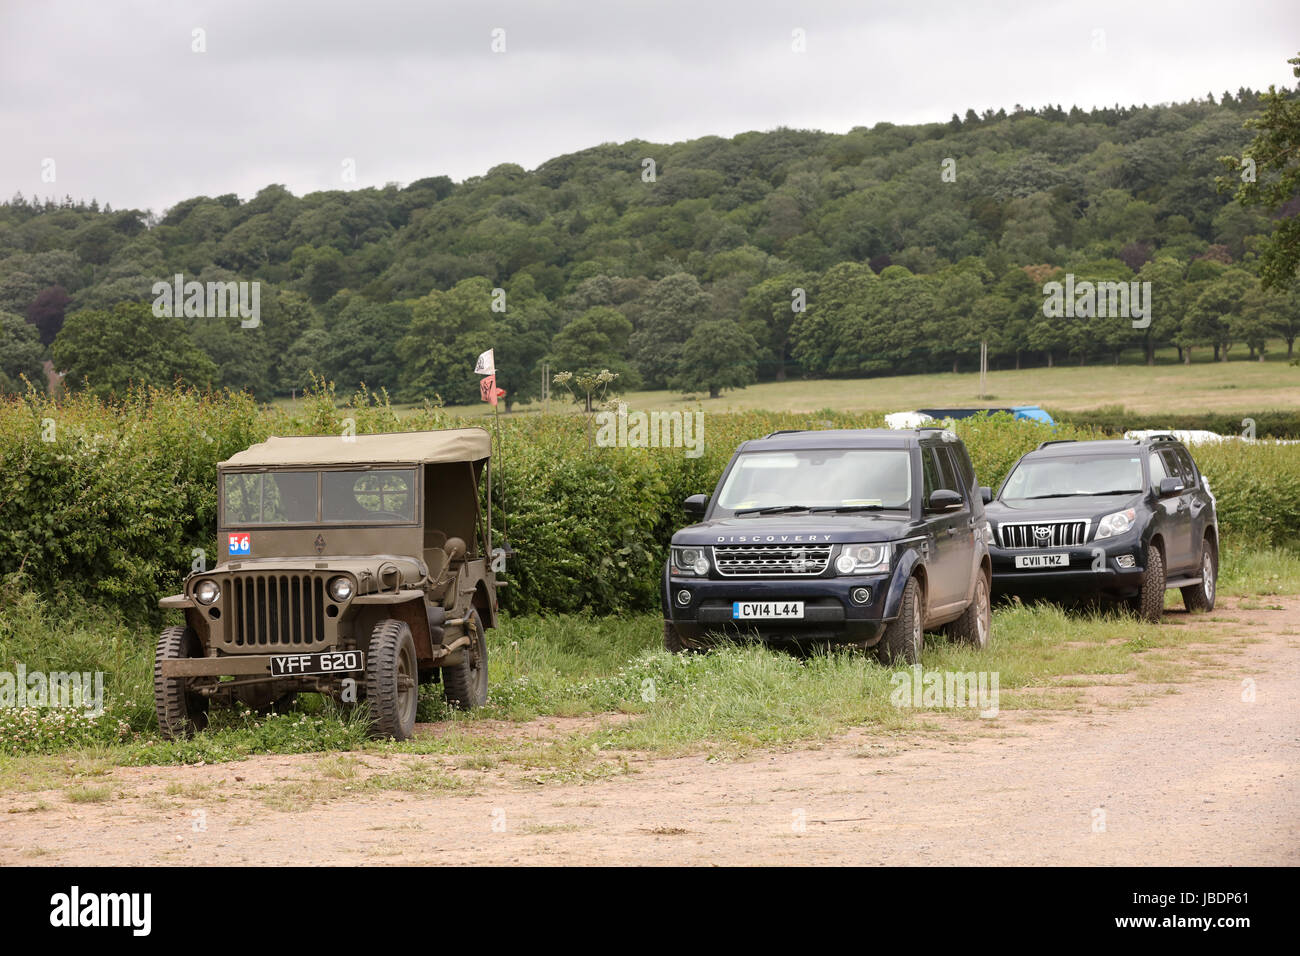 June 2017 - War and peace show at Wraxall in North Somerset. England. Stock Photo